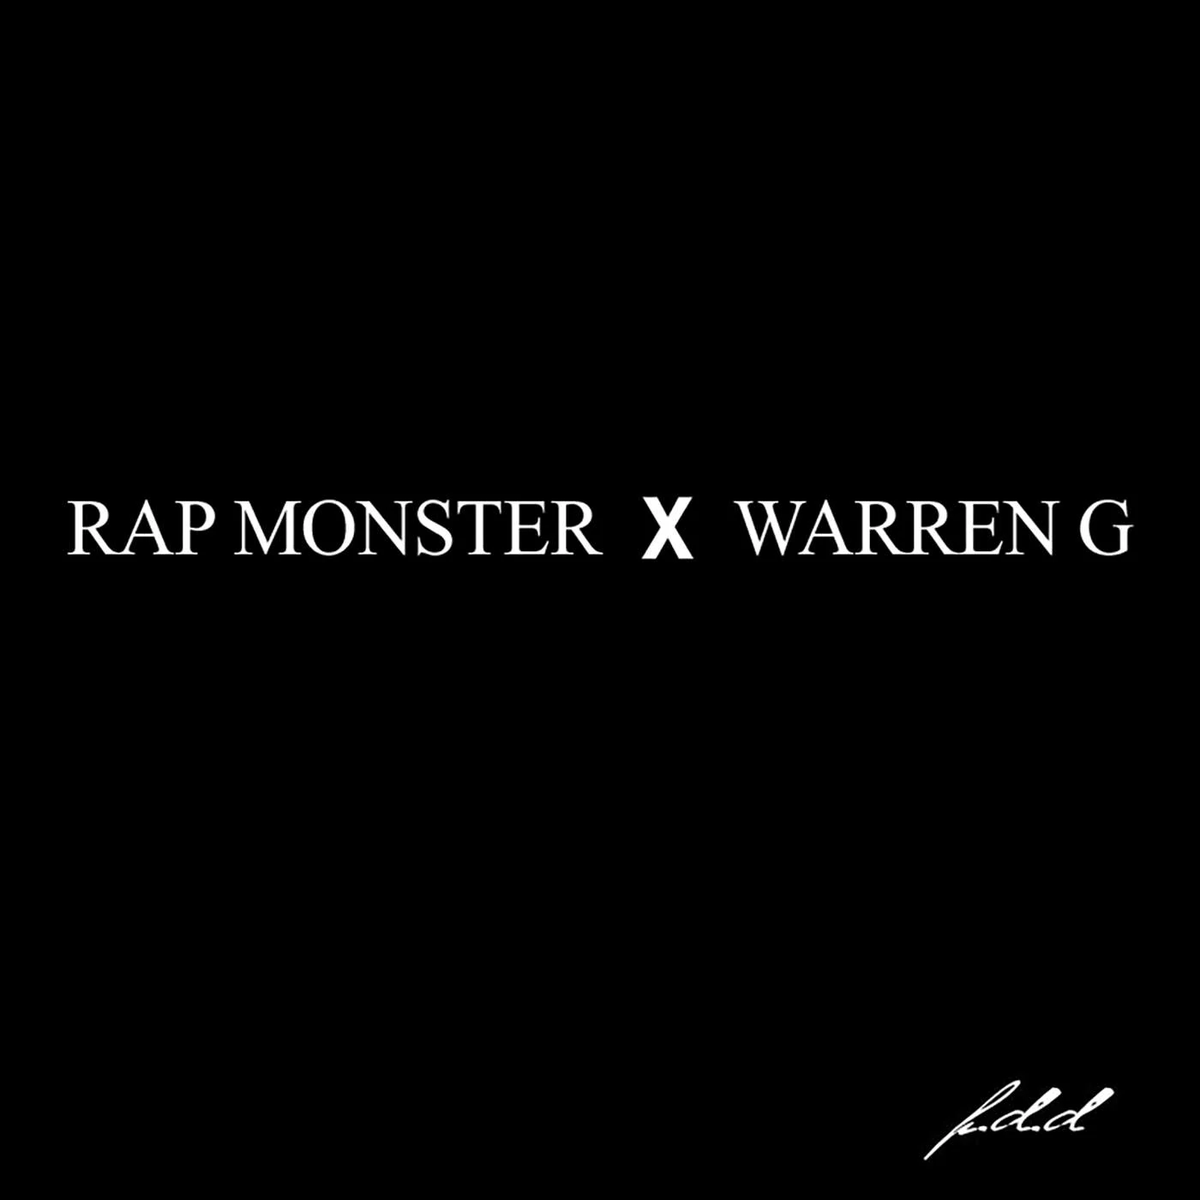 P.P.D. - Warren G ft. RM ; 2015 (rap/hip-hop)- now THIS is a gem- a collab formed from their meeting in AHL which made a rlly good song with the legend WARREN G?? LESS THAN 2 YEARS AFTER DEBUT?? LETS GOO- YT: - 1.49 million views